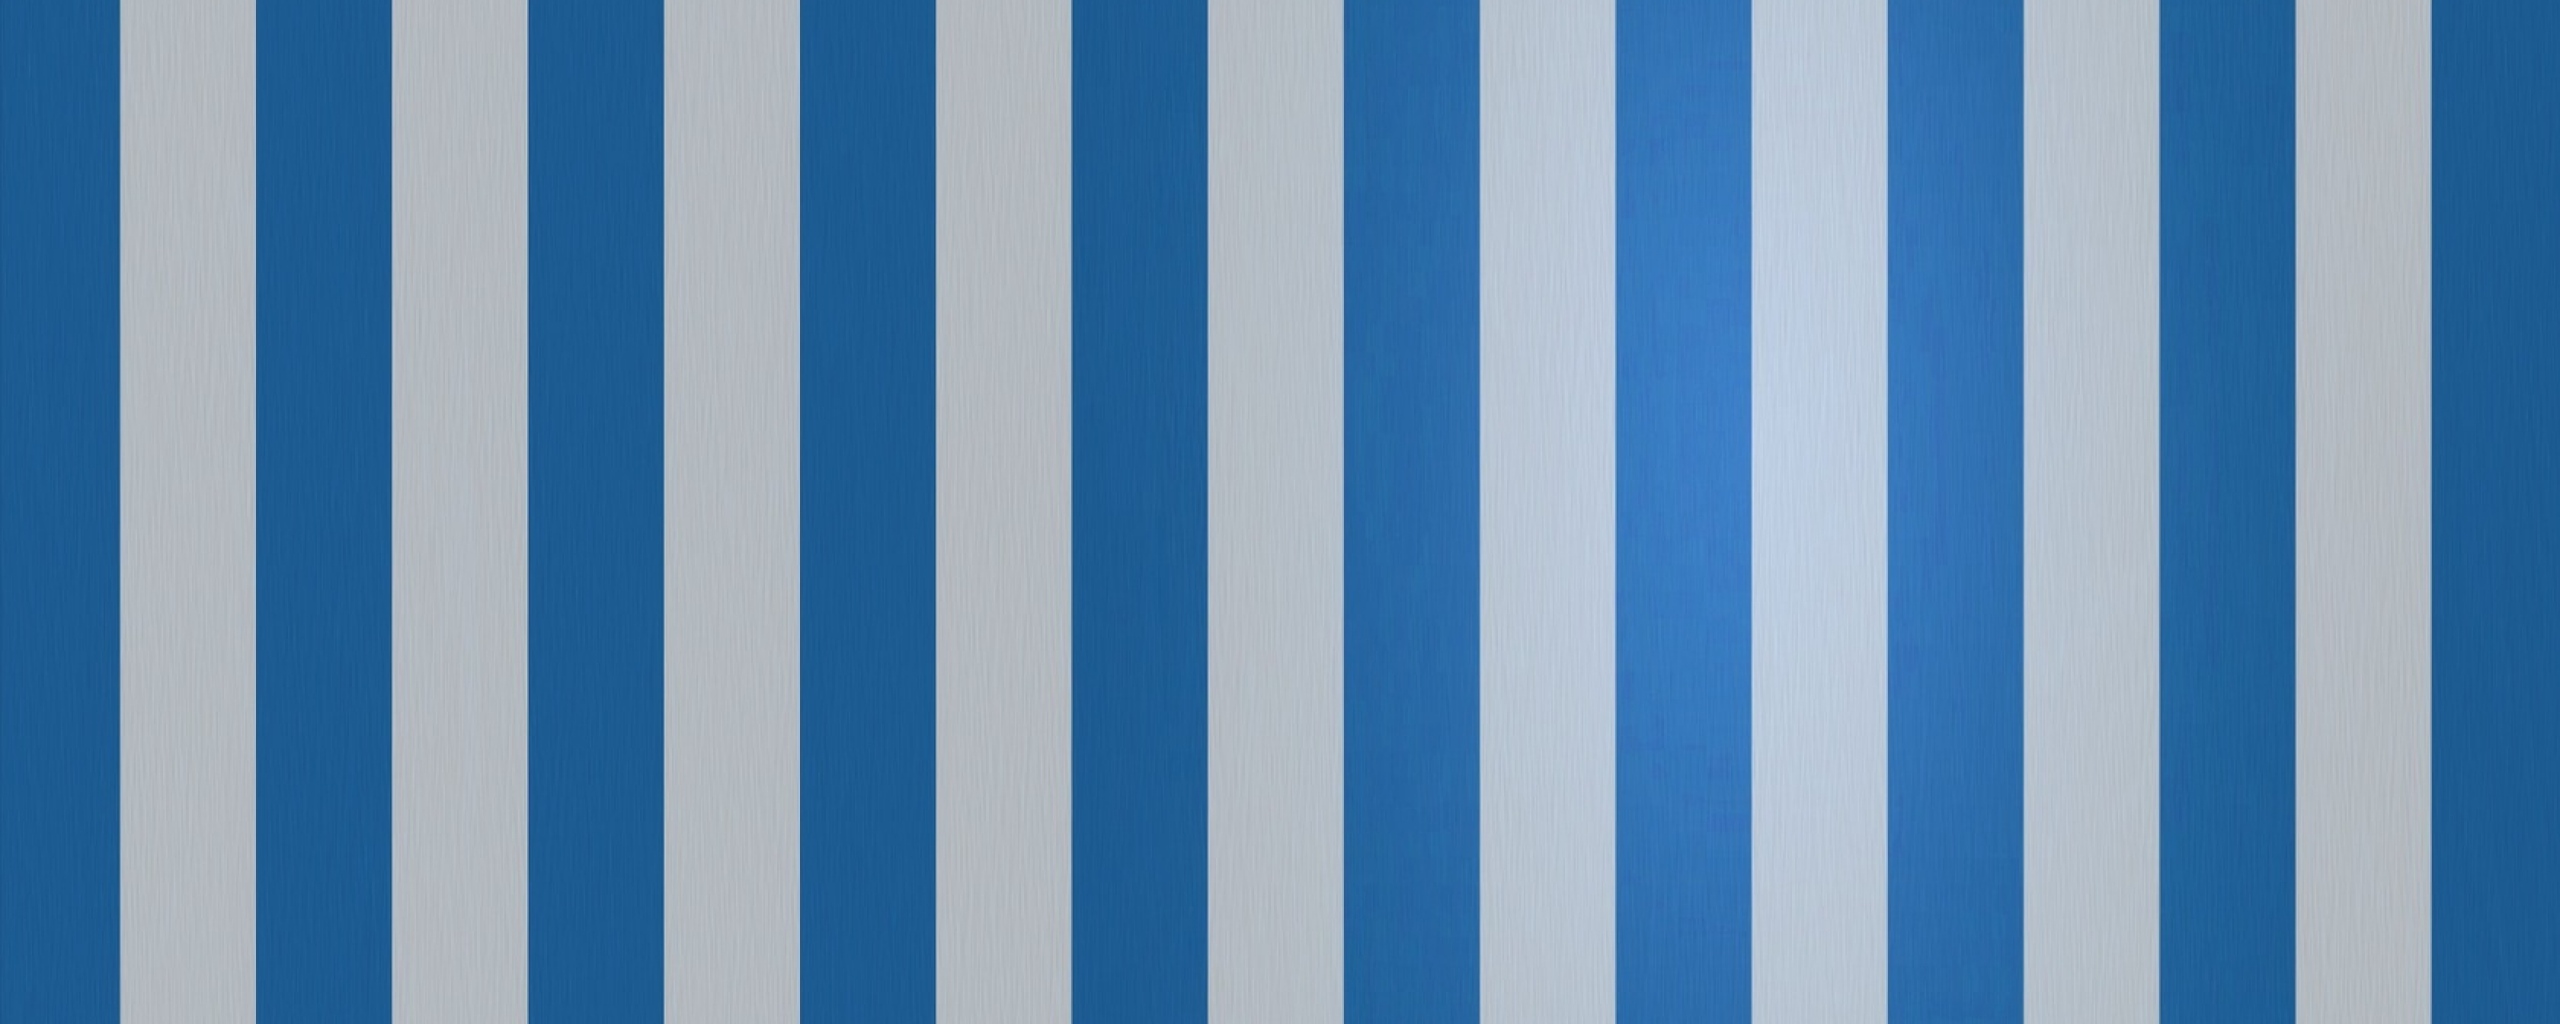 background wallpaper image baby blue and white vertical stripes Car